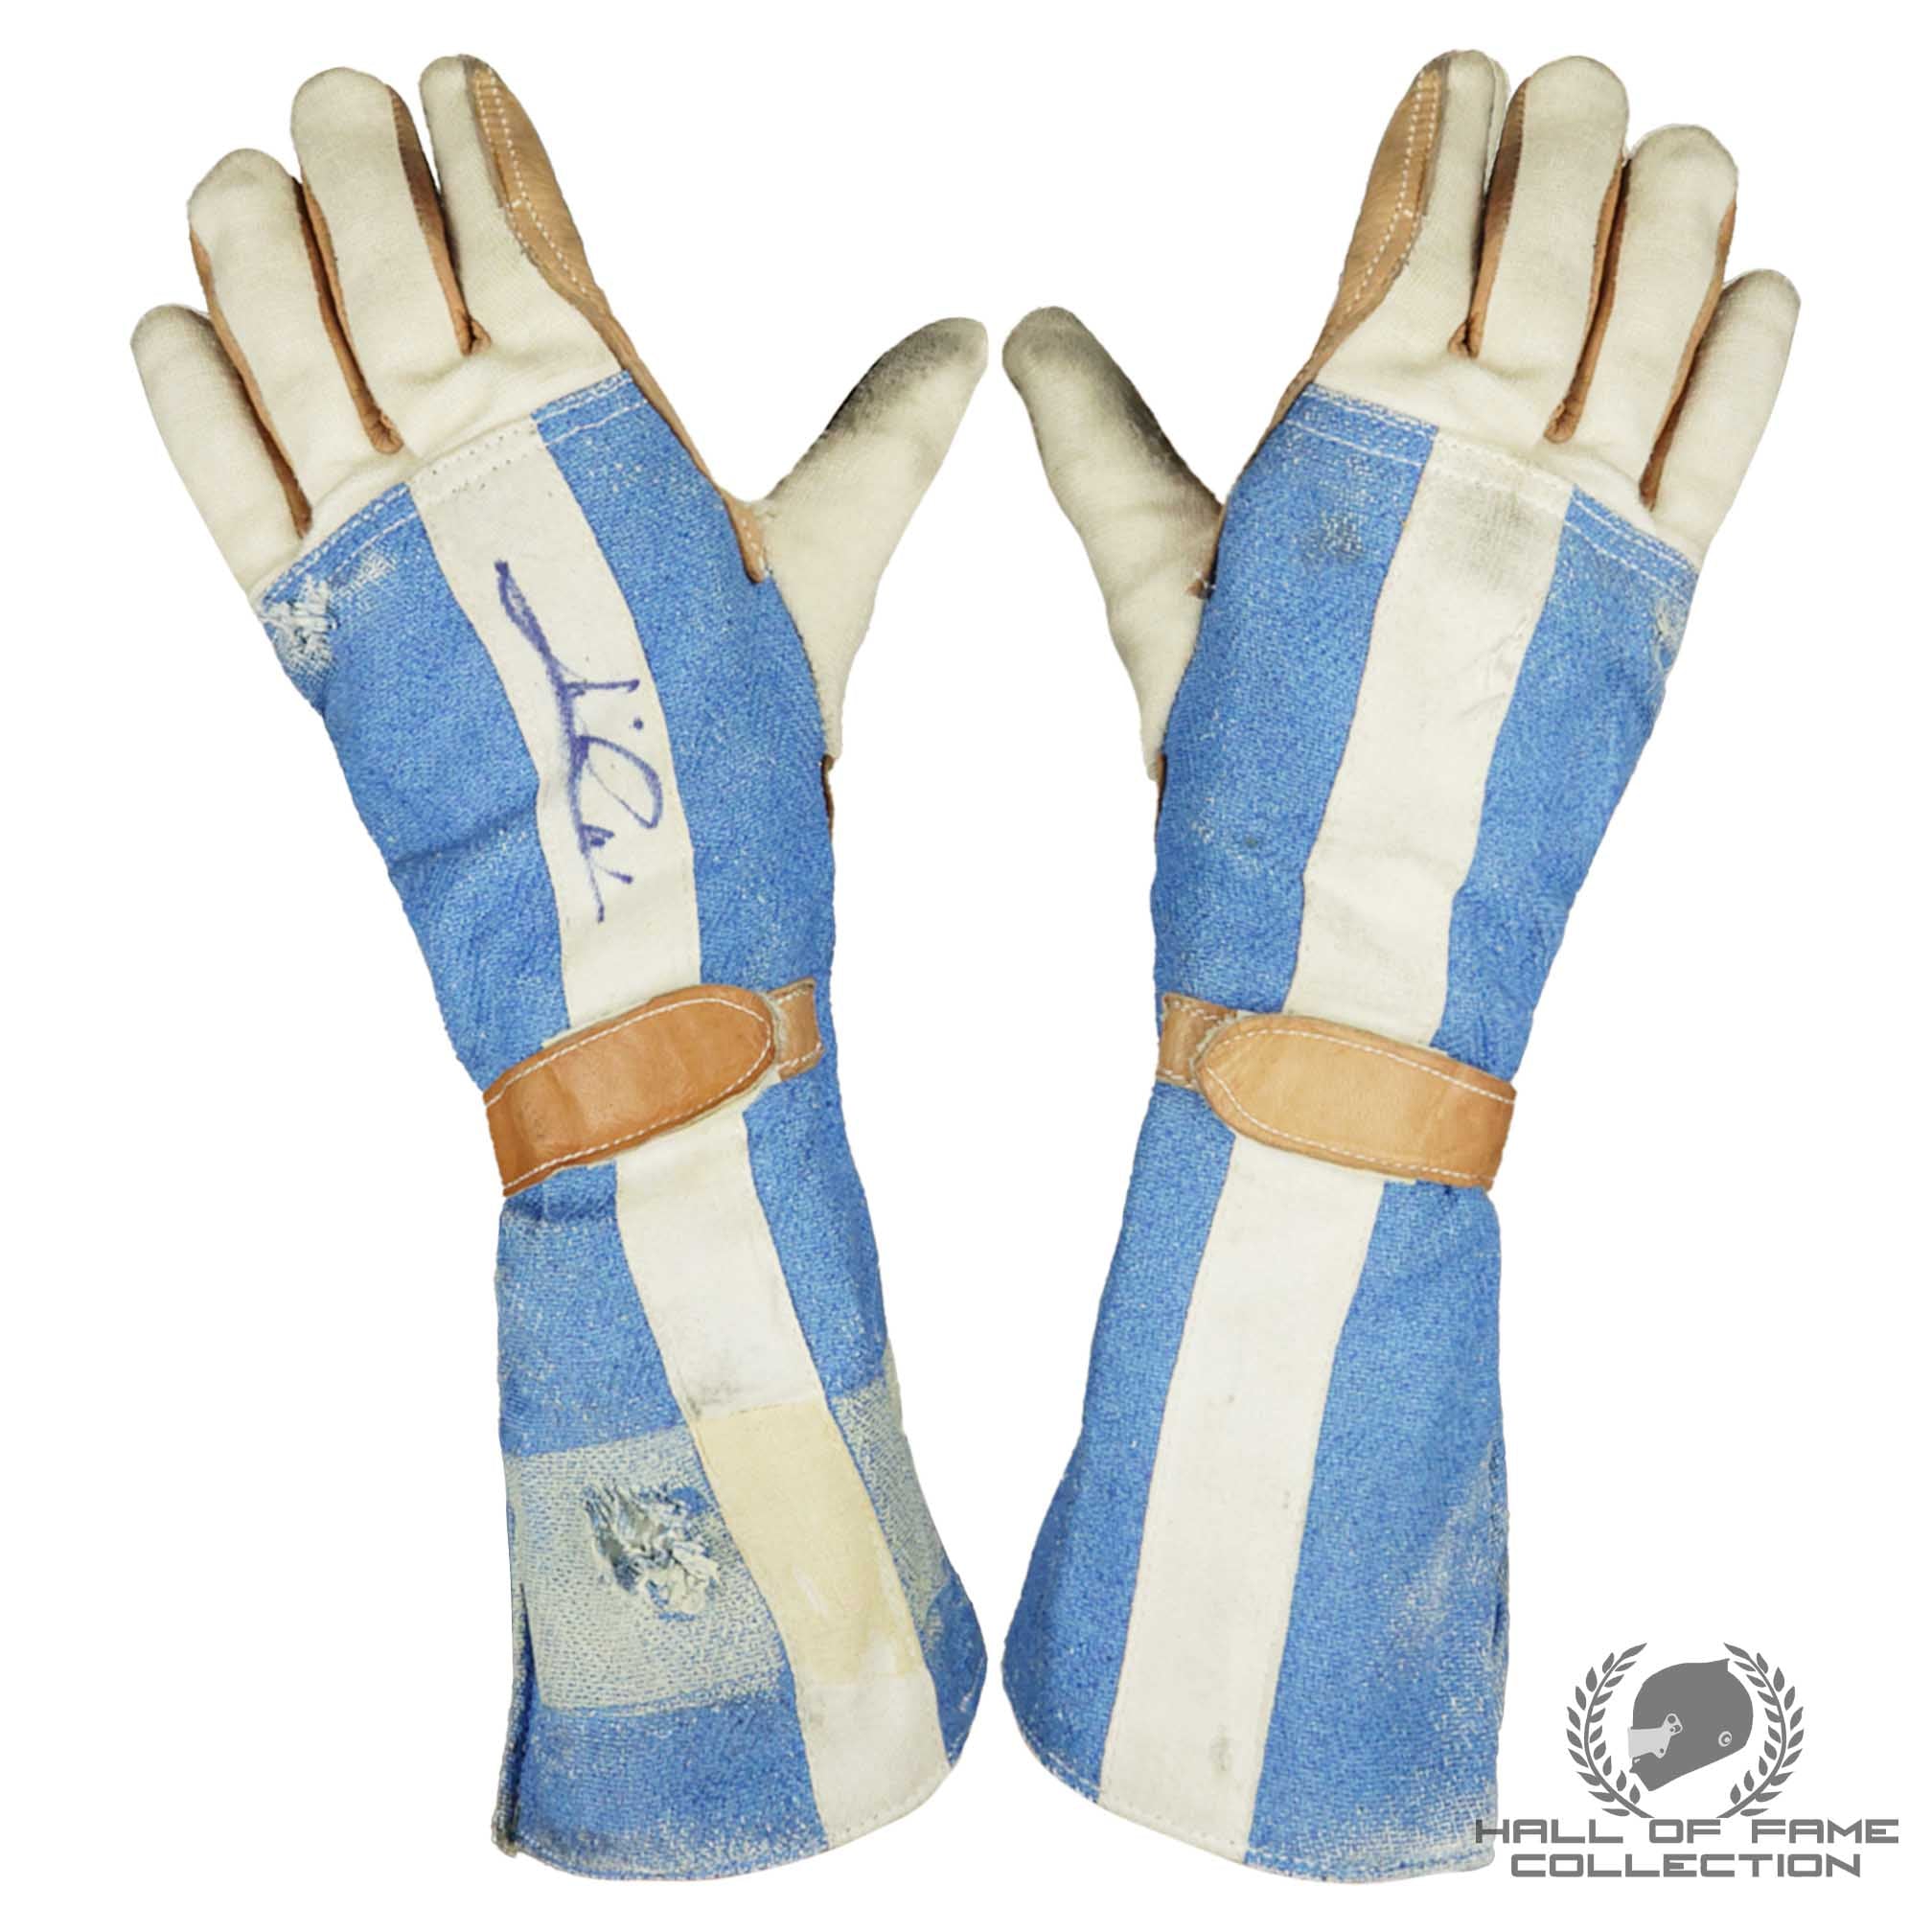 1974-76 Mario Andretti Signed Race Used F5000/F1 Gloves